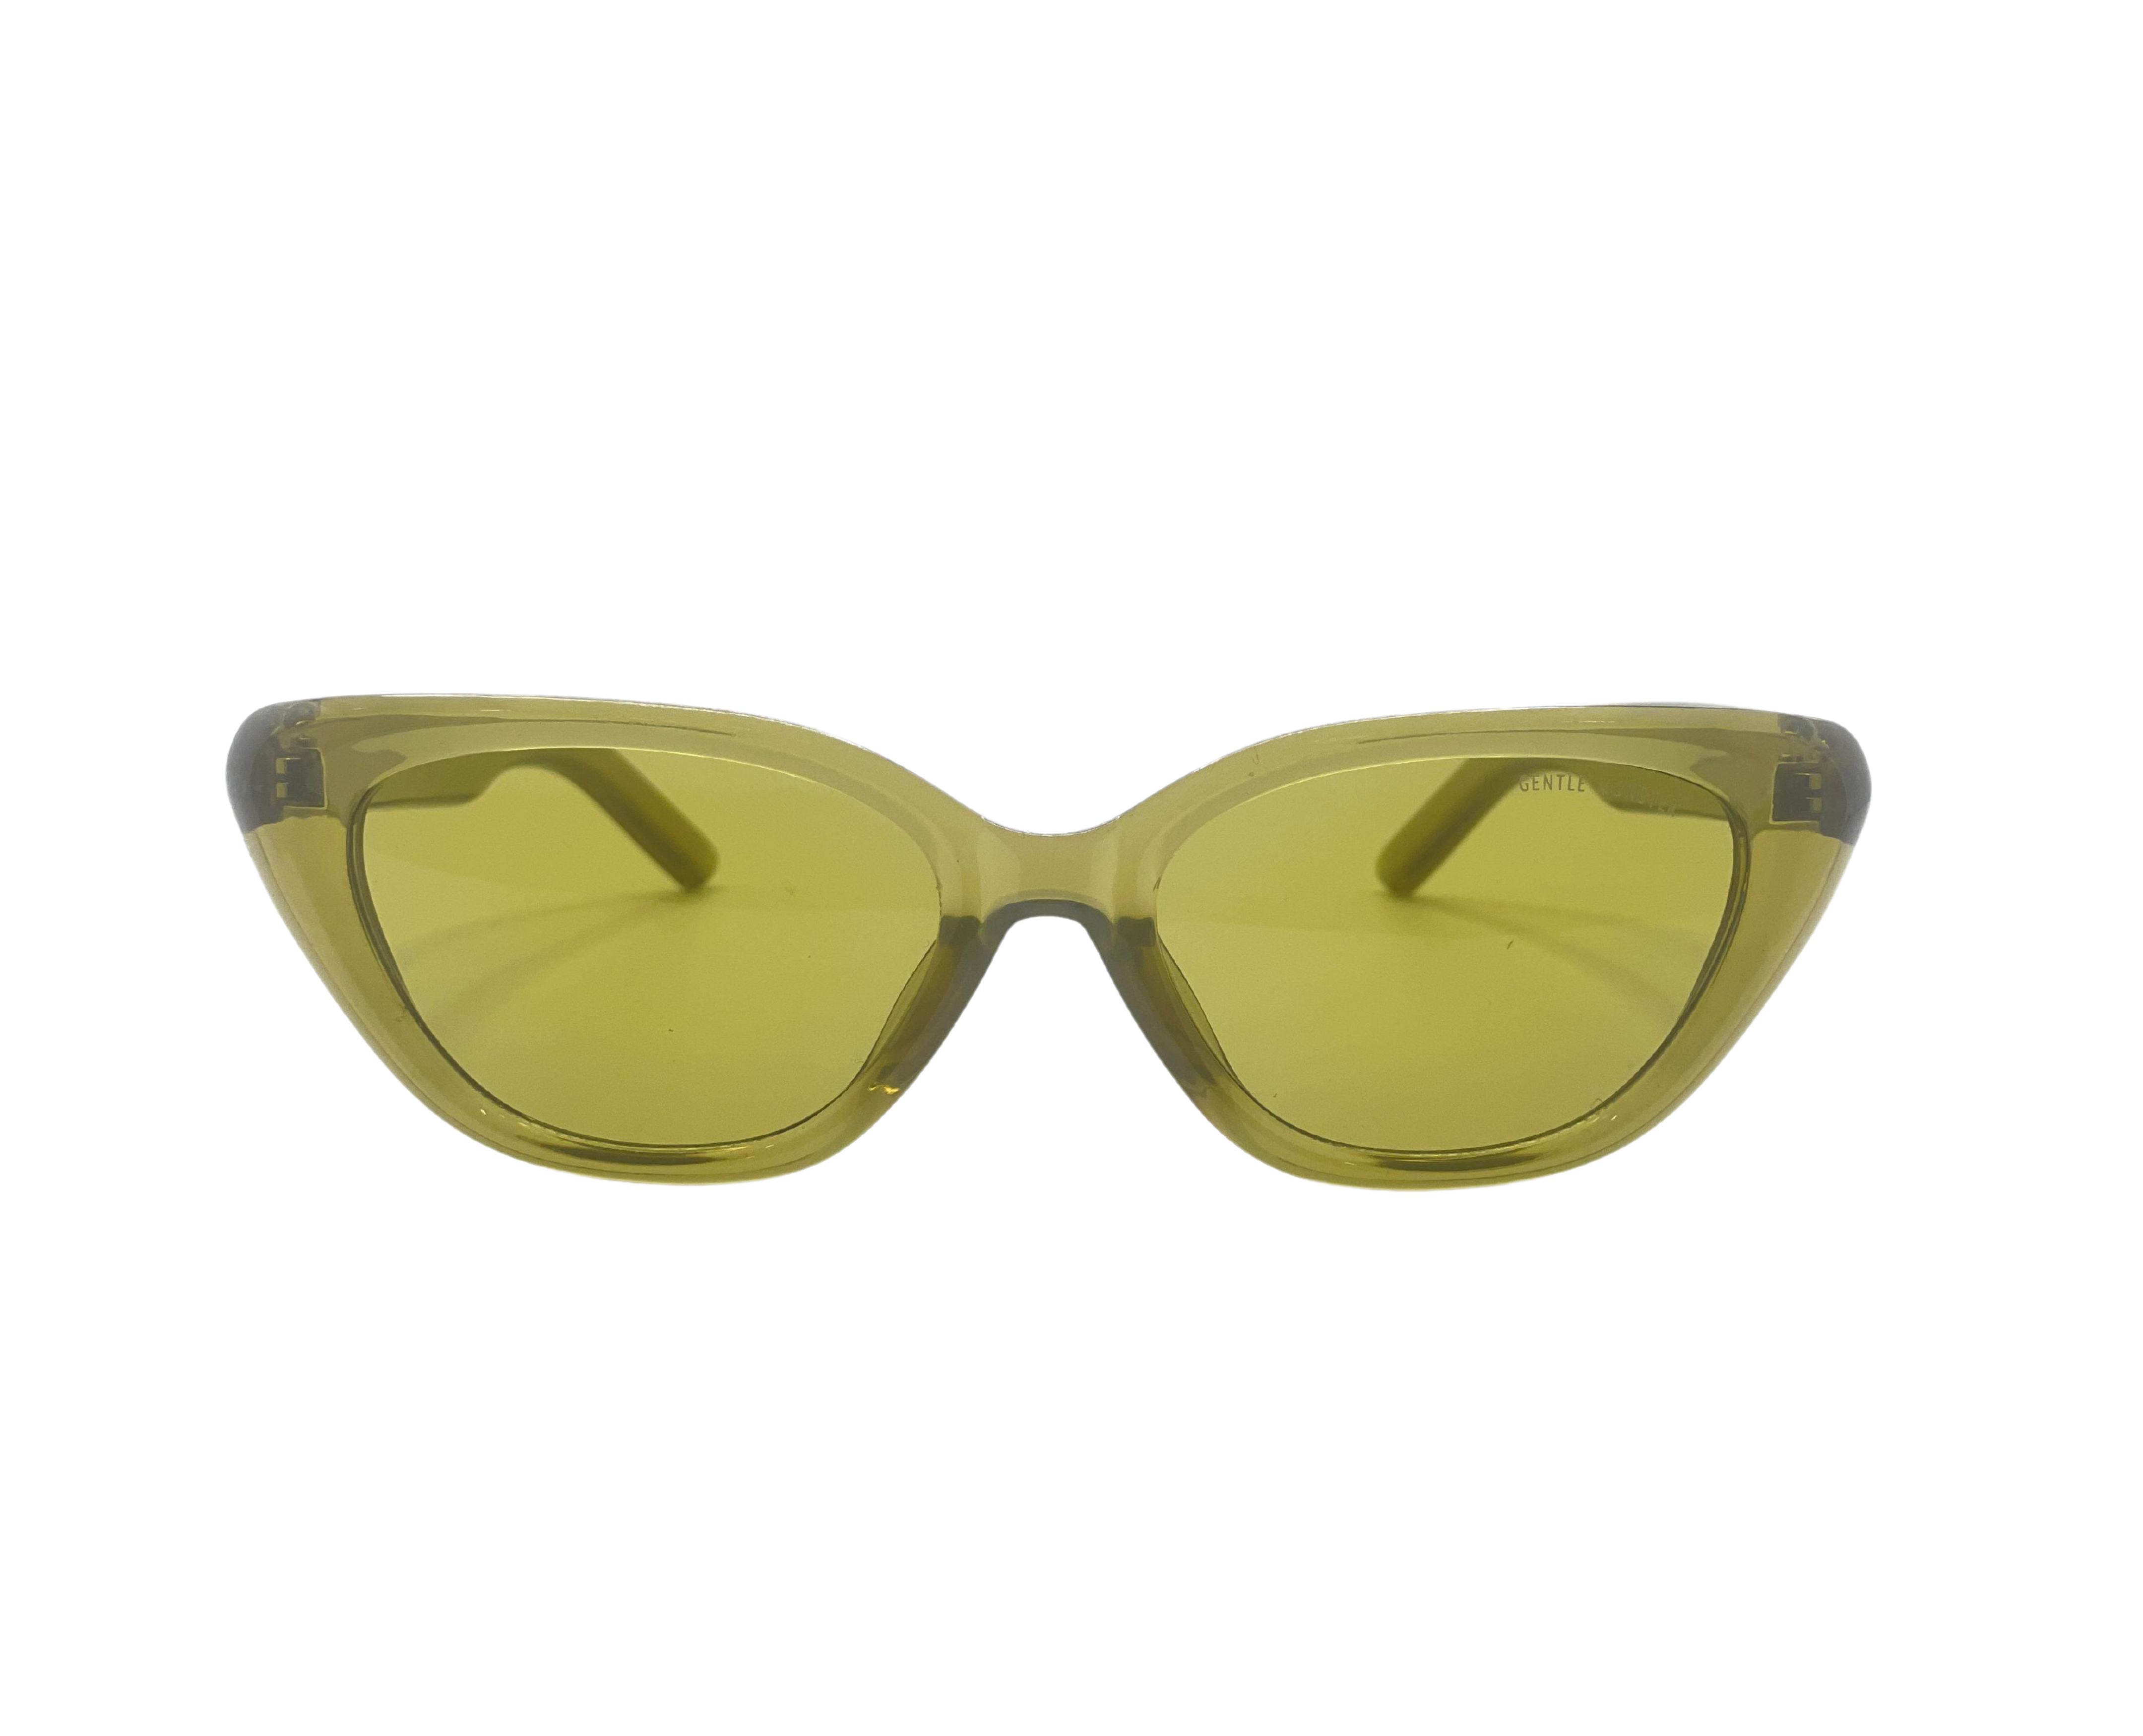 NS Deluxe - 9156 - Olive - Sunglasses